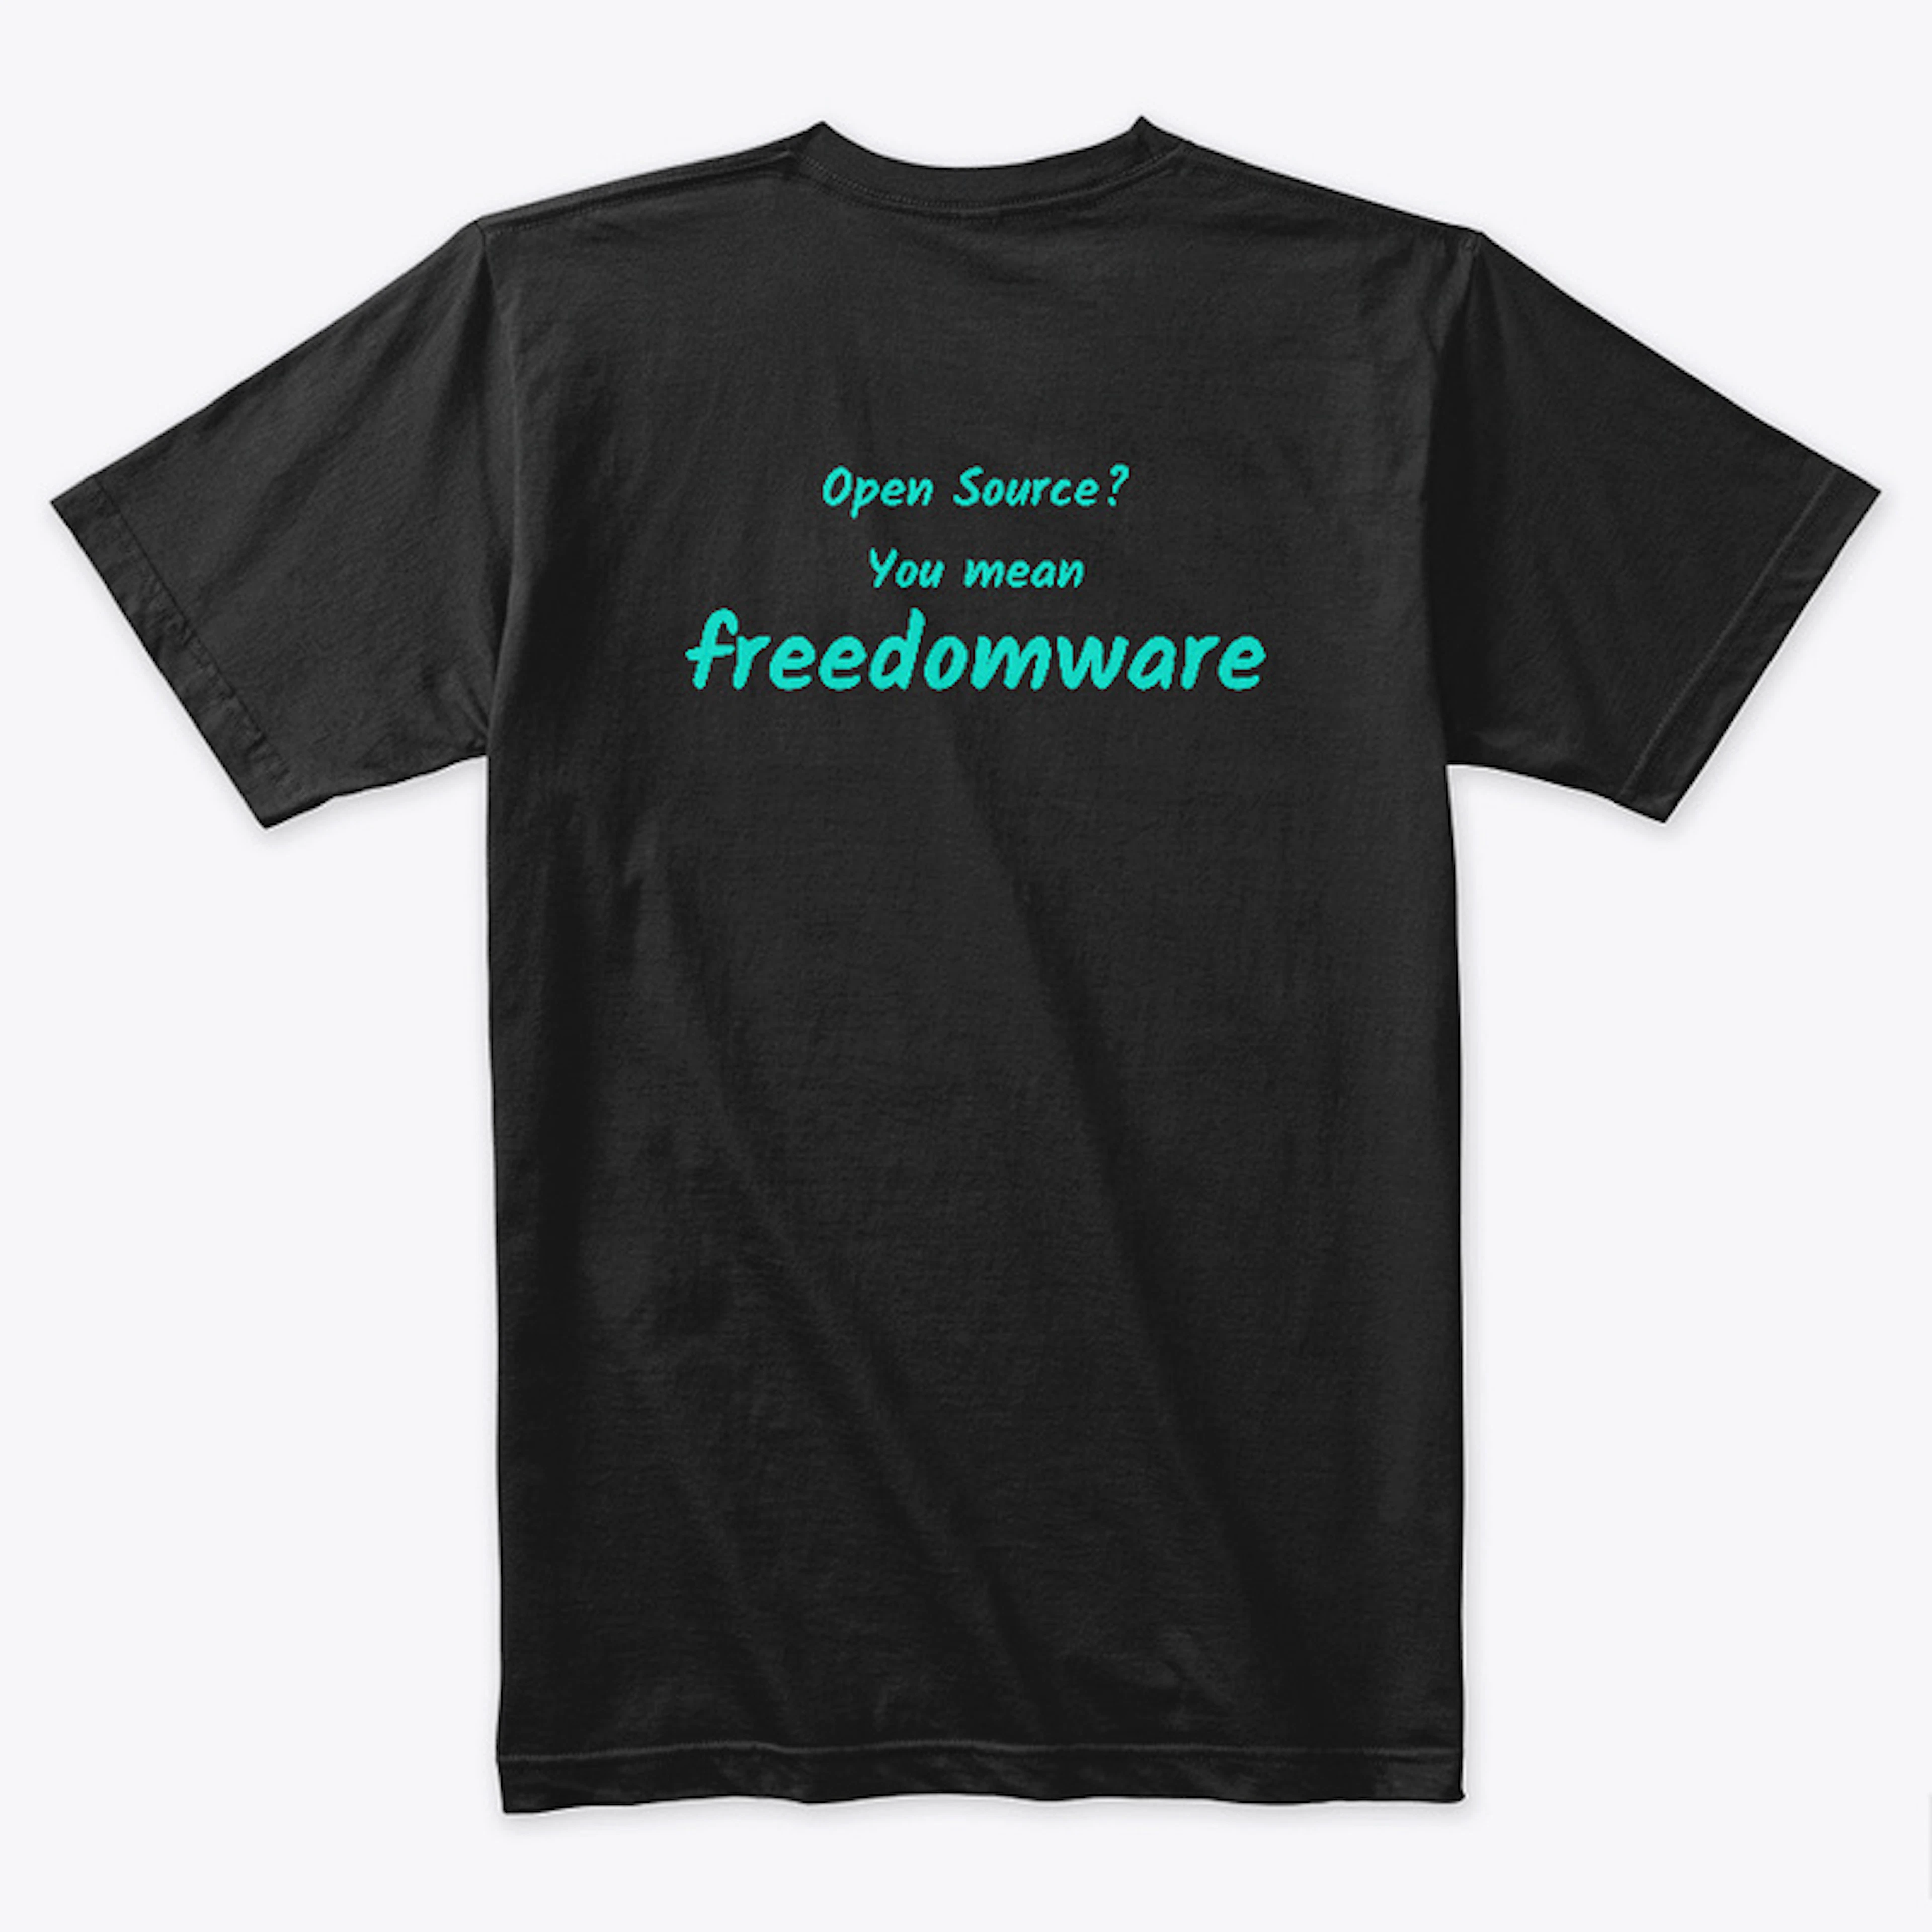 Open source? You mean freedomware